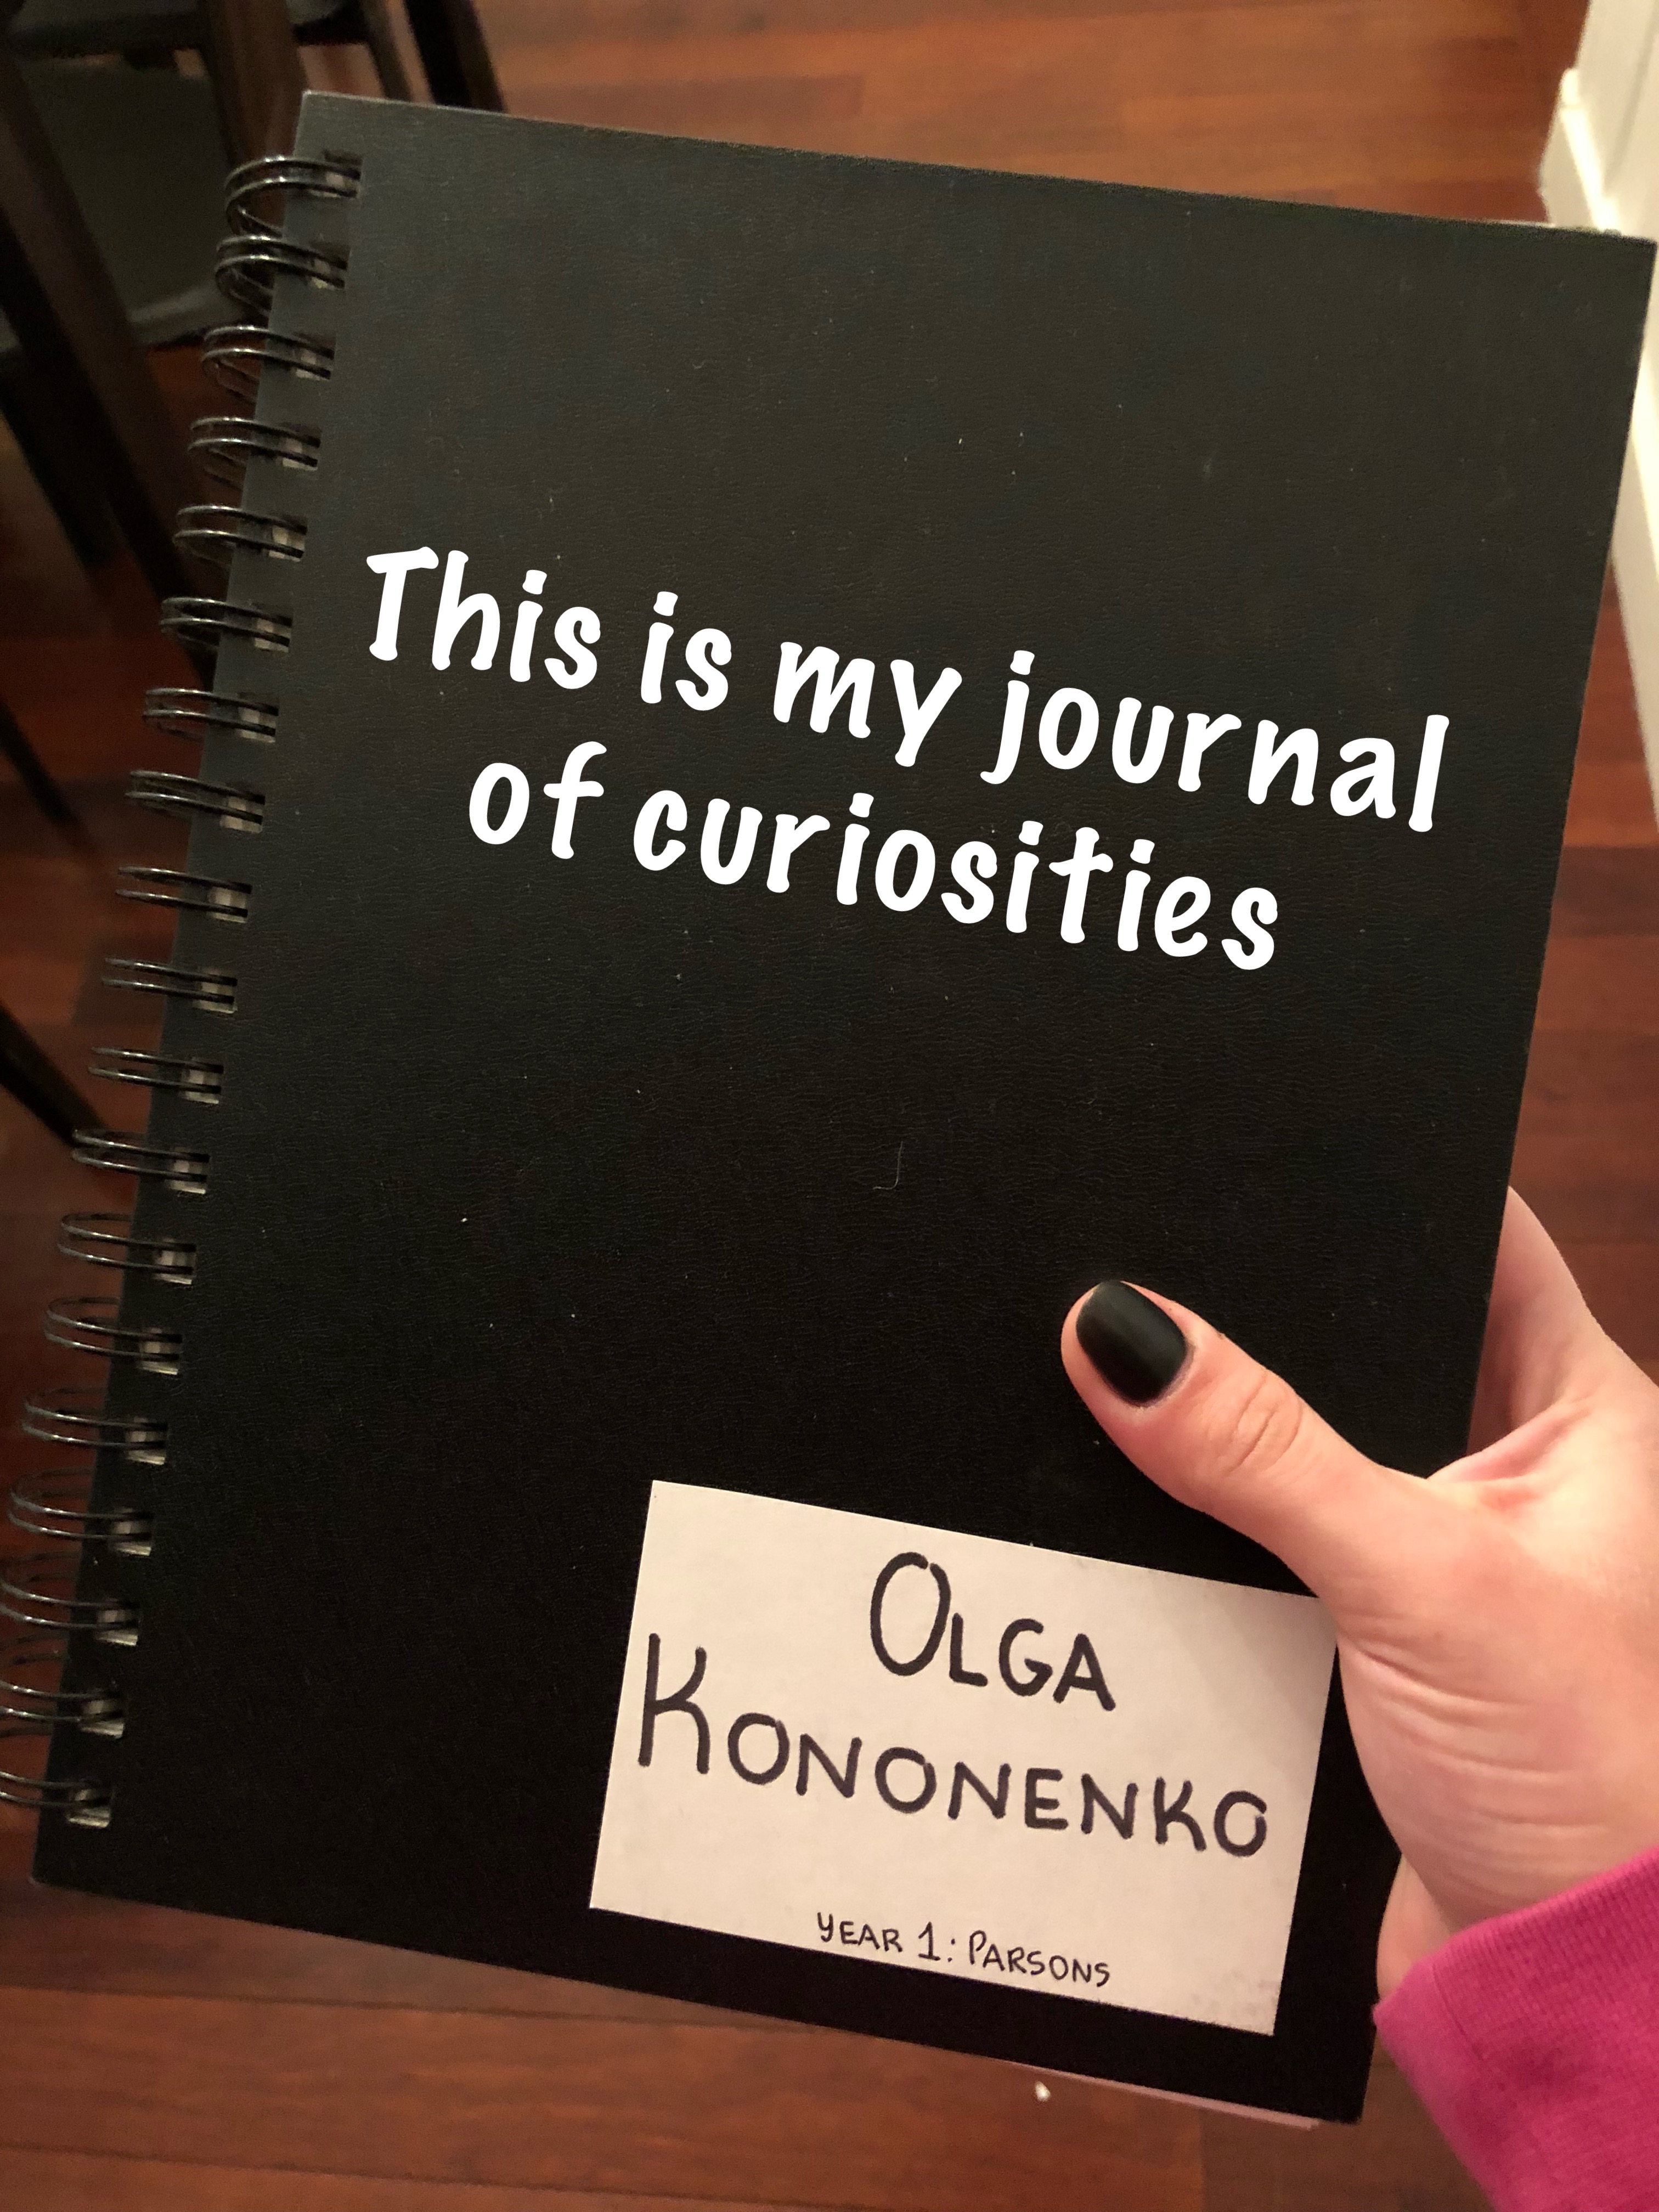 Curiosity Journal, 7 days of collecting